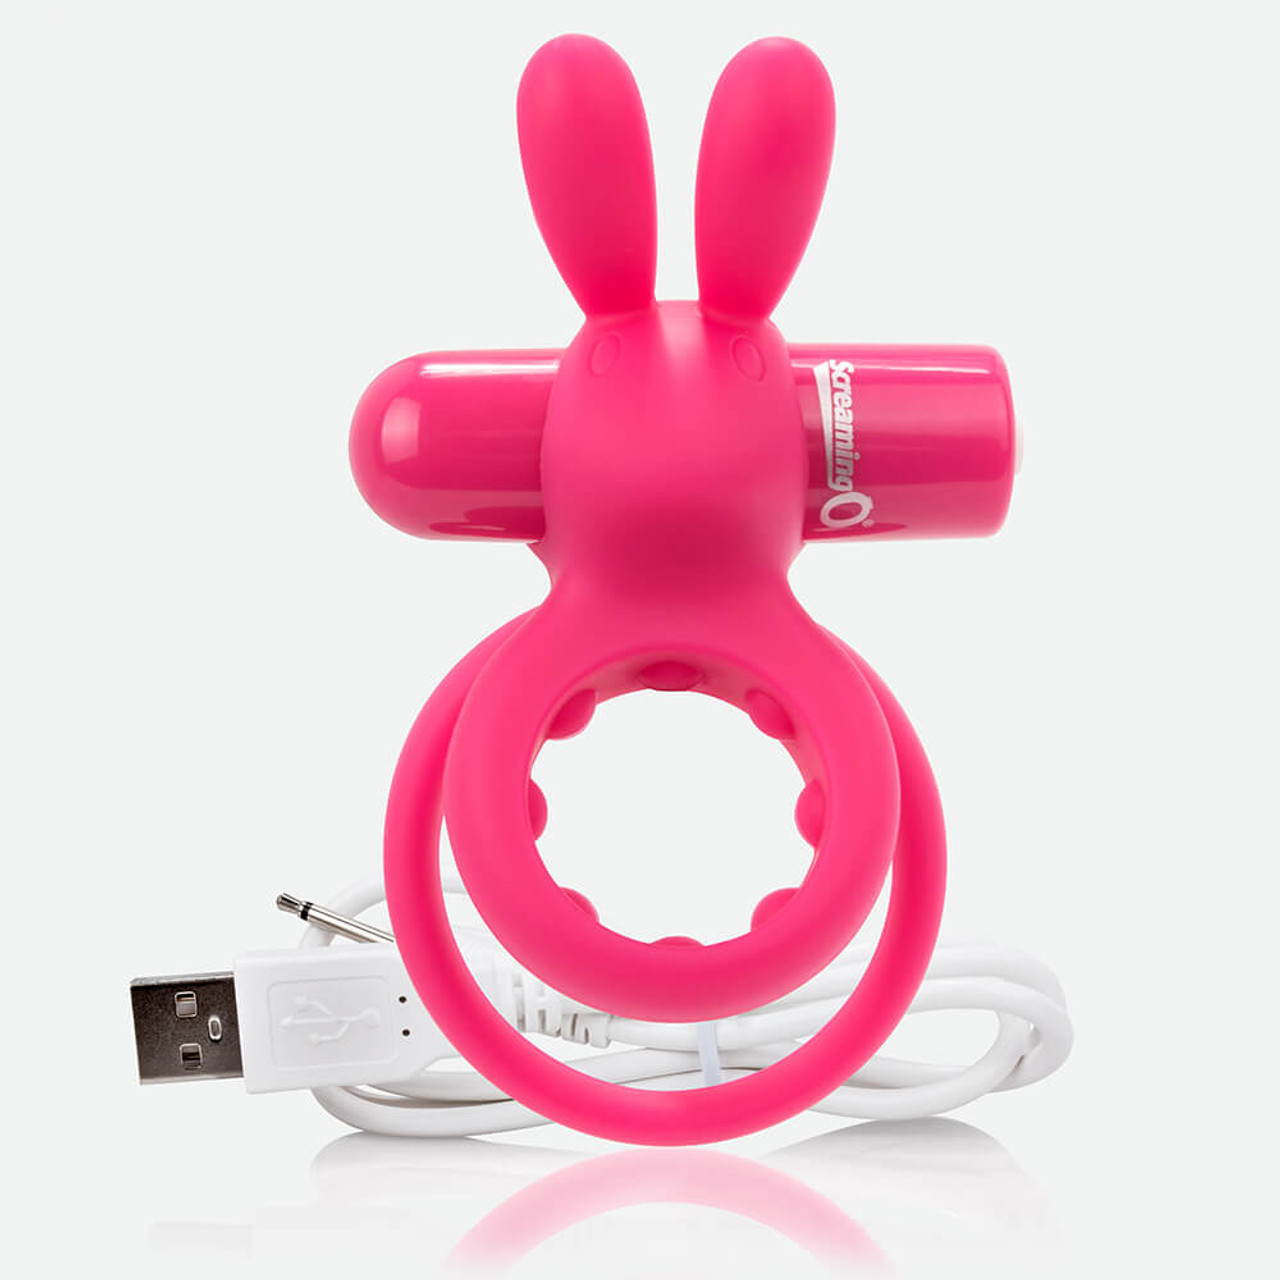 Charged OHare Vibrating Rabbit Cock Ring | Buy Screaming O sex toys online from CondomDepot